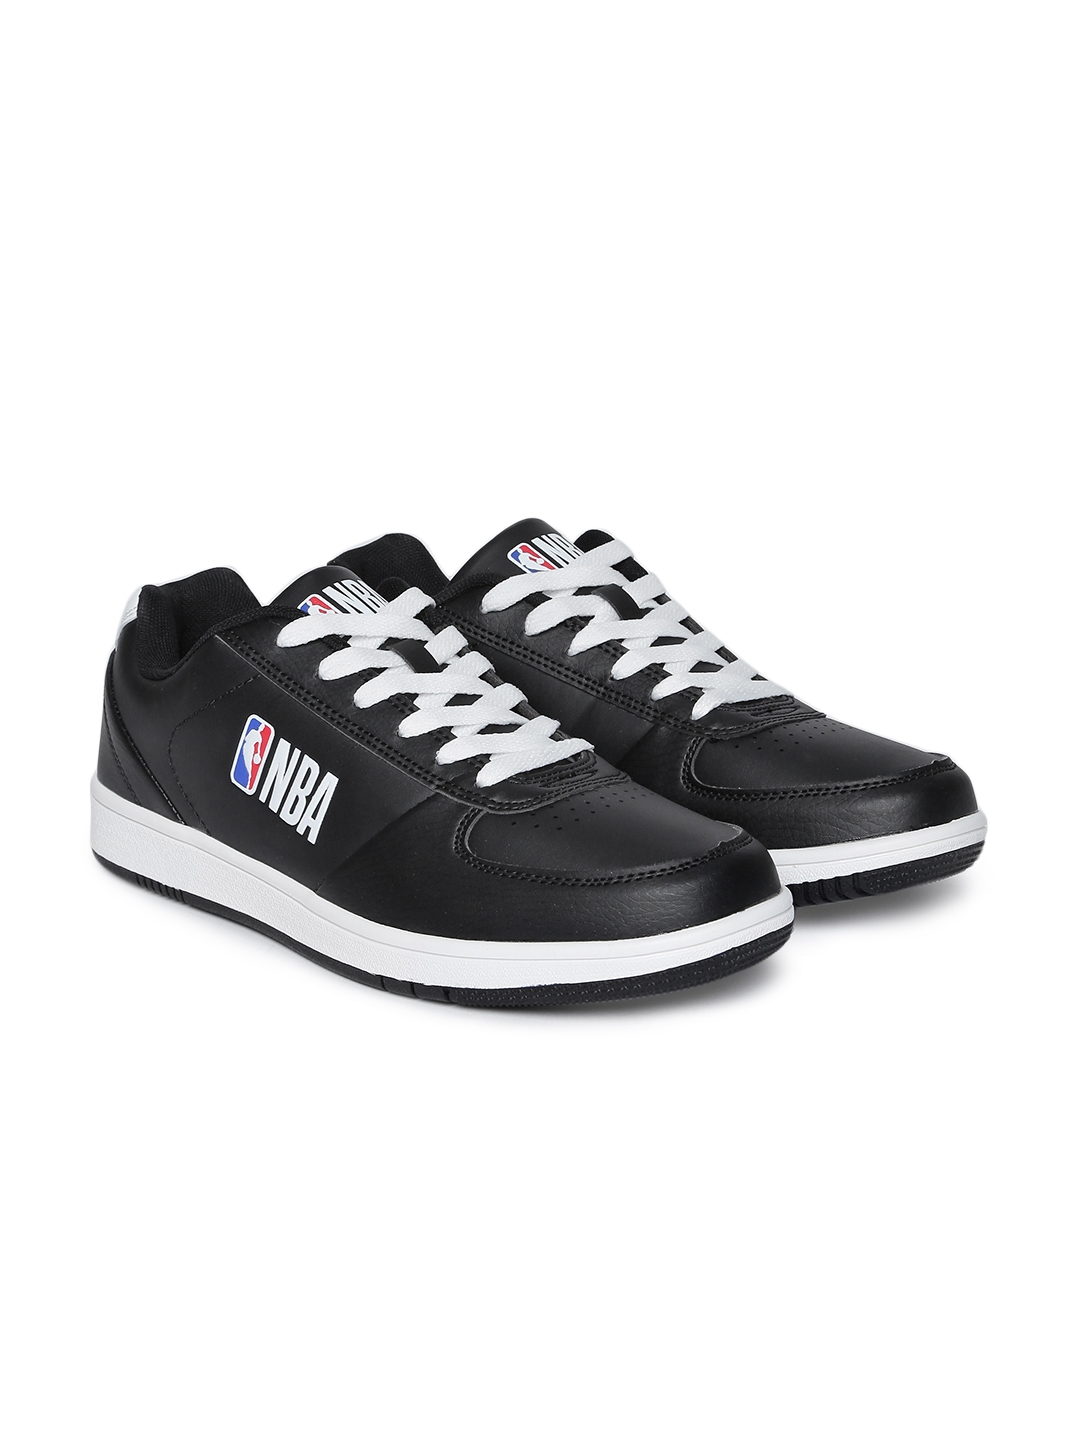 PUMA Fusion Nitro Basketball Shoes For Men  Buy PUMA Fusion Nitro  Basketball Shoes For Men Online at Best Price  Shop Online for Footwears  in India  Flipkartcom